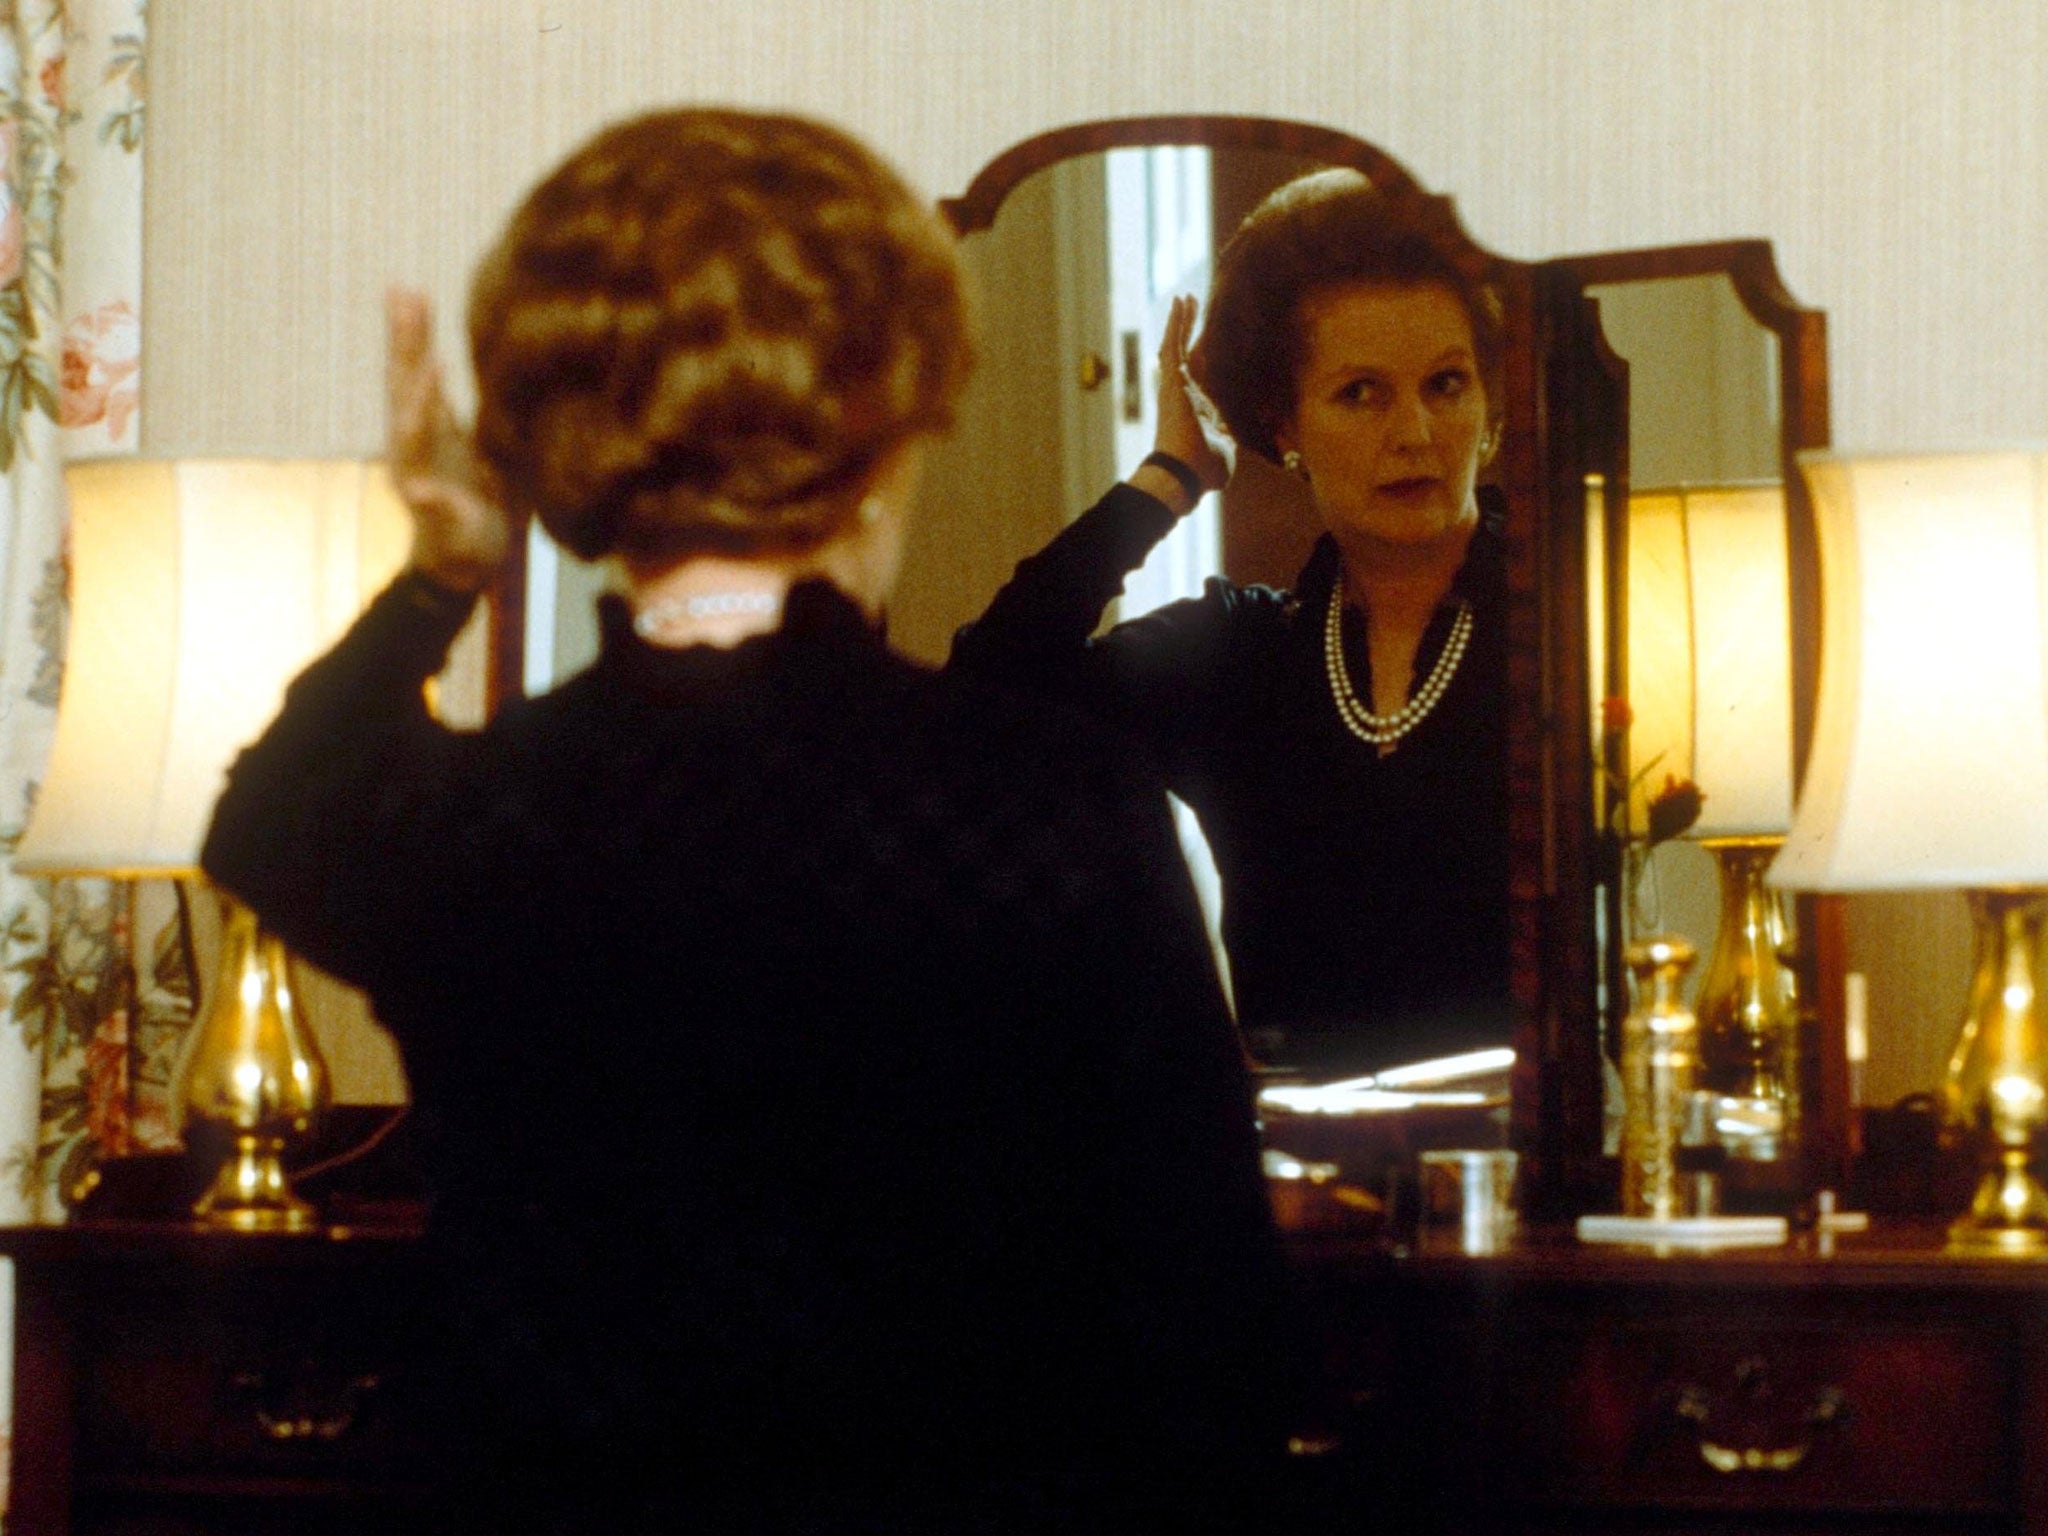 Margaret Thatcher at No. 10, checking her hair in the mirror - She has been voted by politicians of all parties as the most successful prime minister since the Second World War